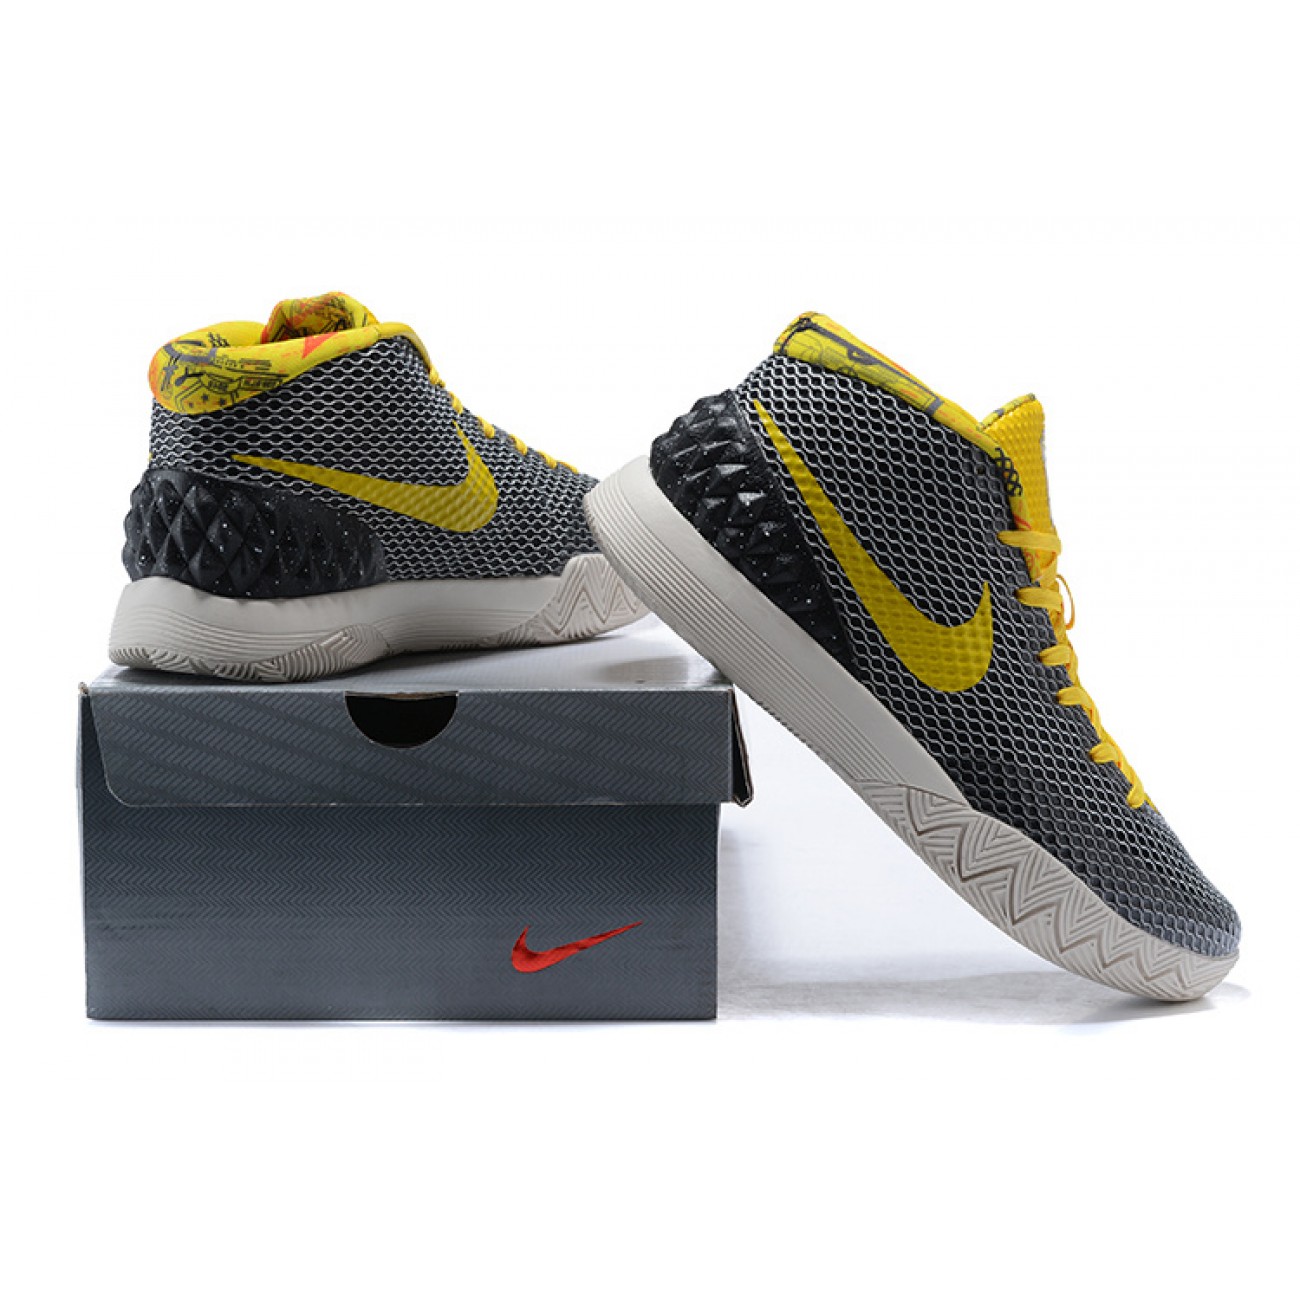 Kyrie 1 "Hall of fame" Black/Yellow